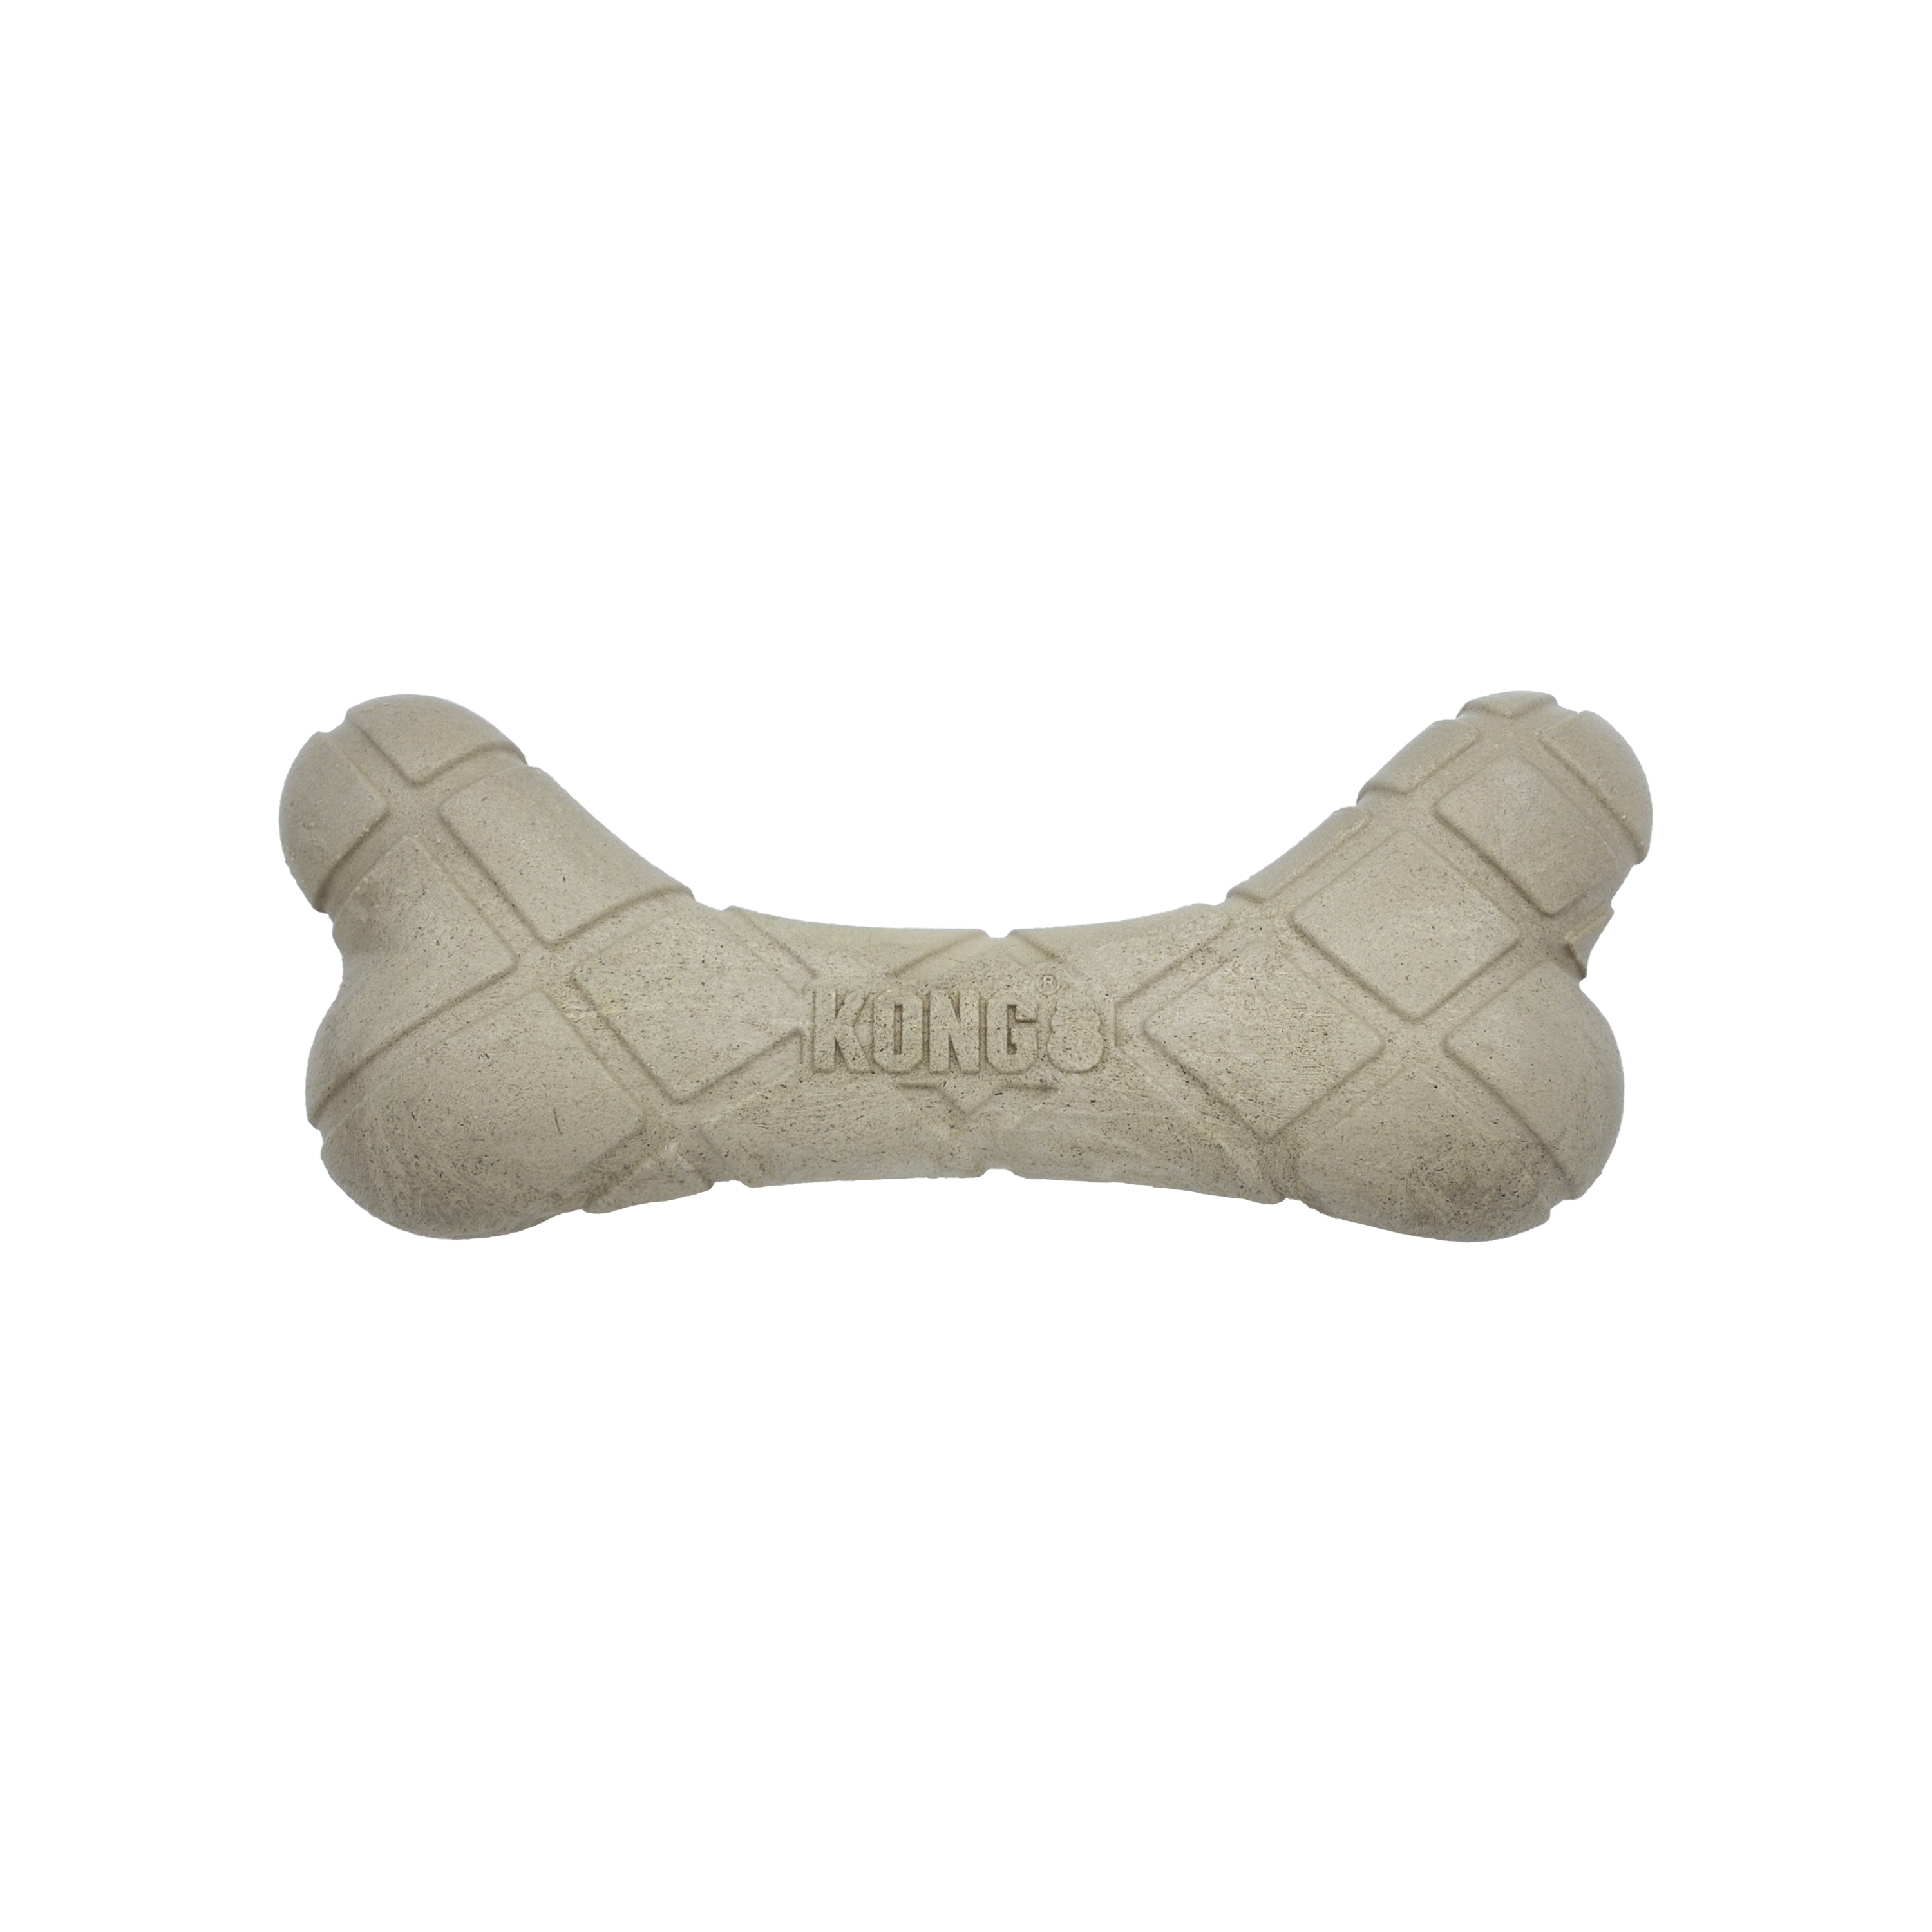 ChewStix Tough Femur offpack product image